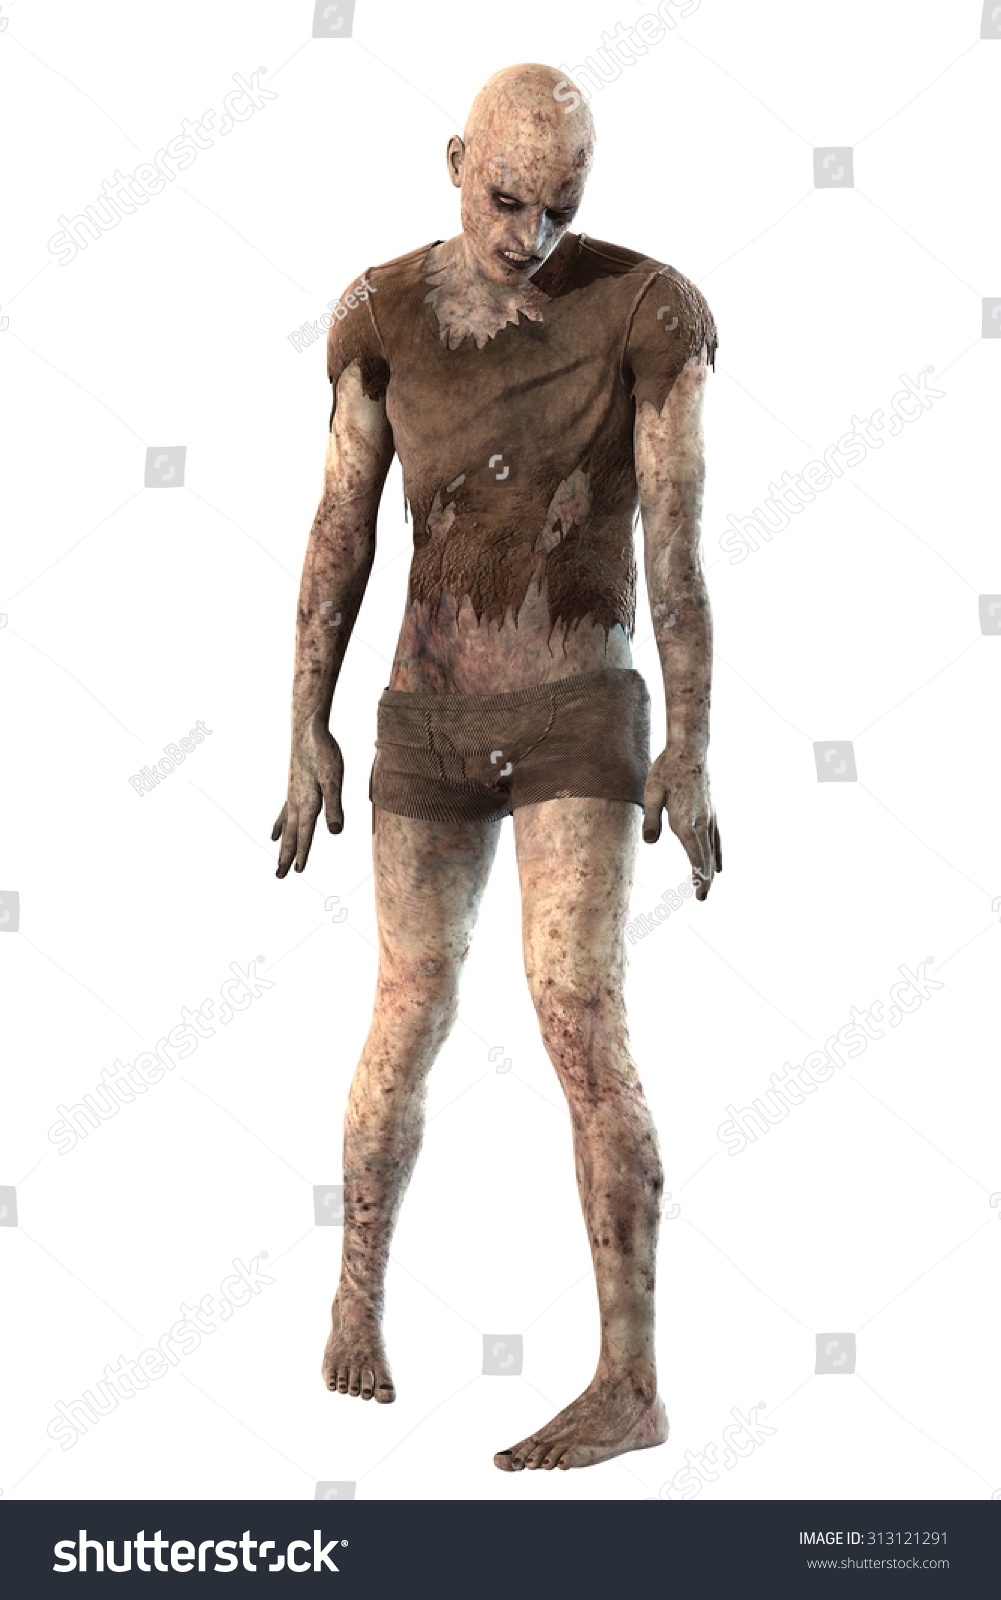 Zombie Isolated On White Background Stock Photo 313121291 : Shutterstock